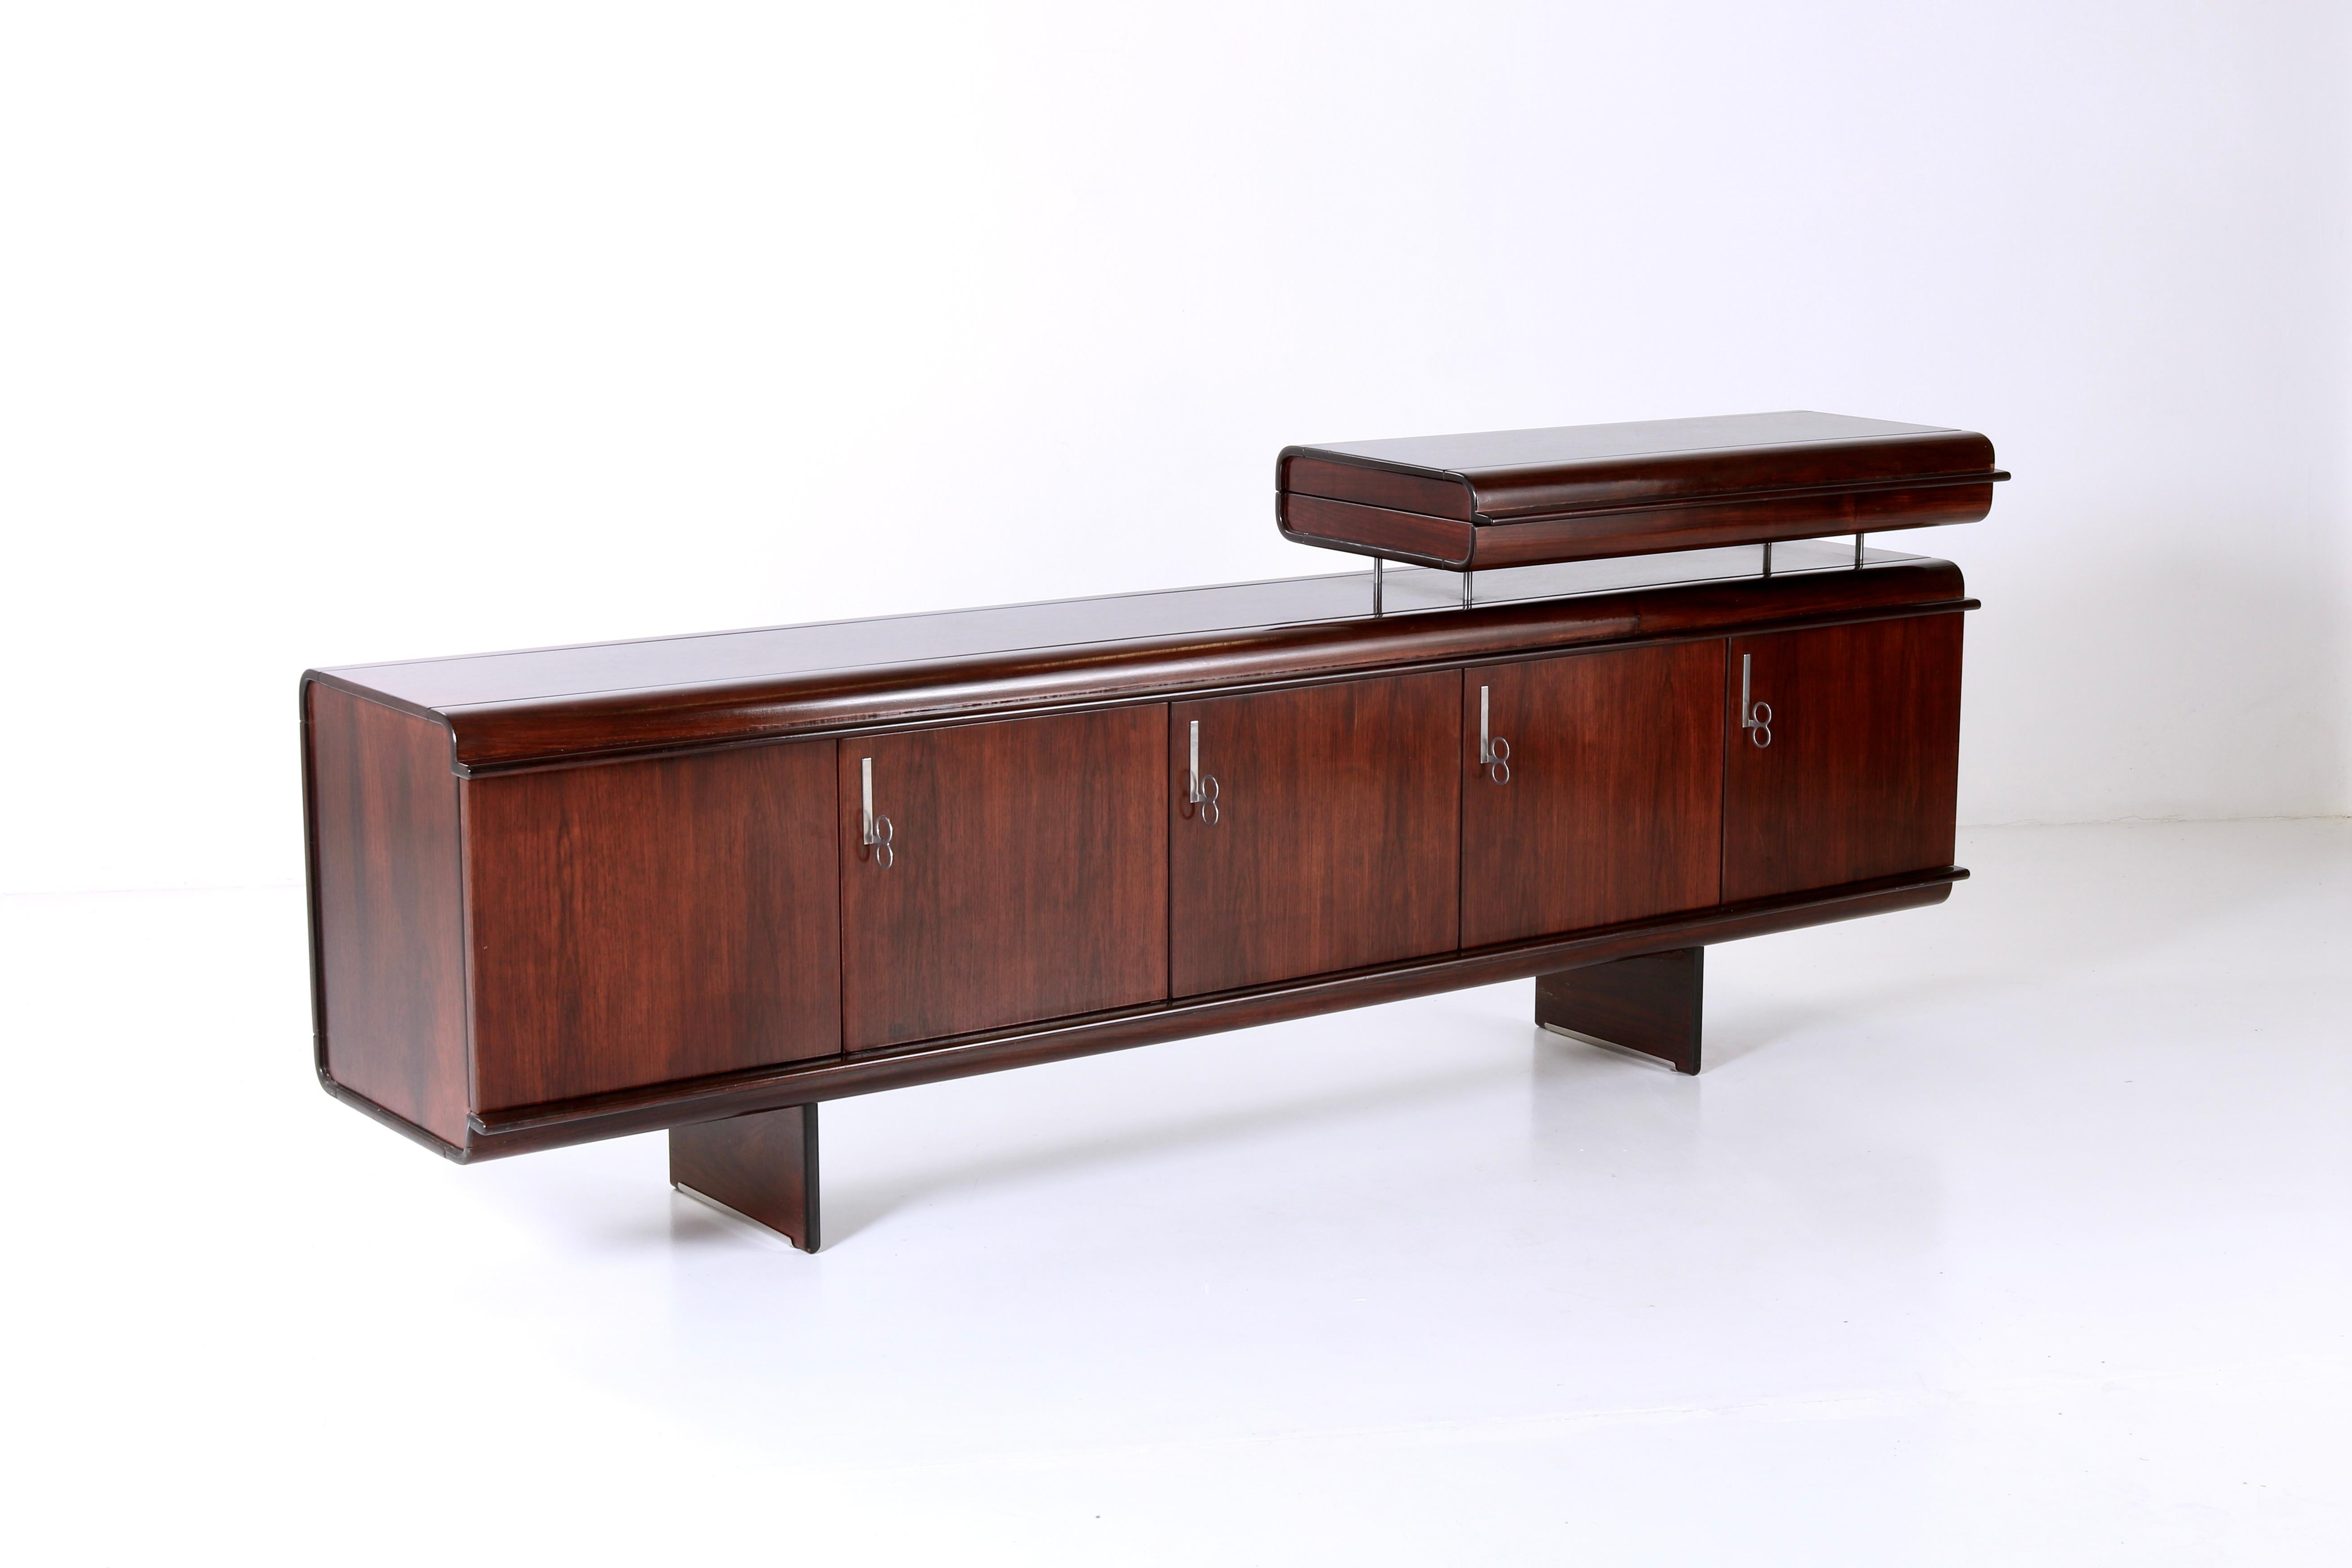 

The Pellicano sideboard by Vittorio Introini embodies elegance of mid-century Italian design. Crafted in wood with details in chrome-plated metal, its sleek lines and minimalist design exude timeless sophistication while offering considerable